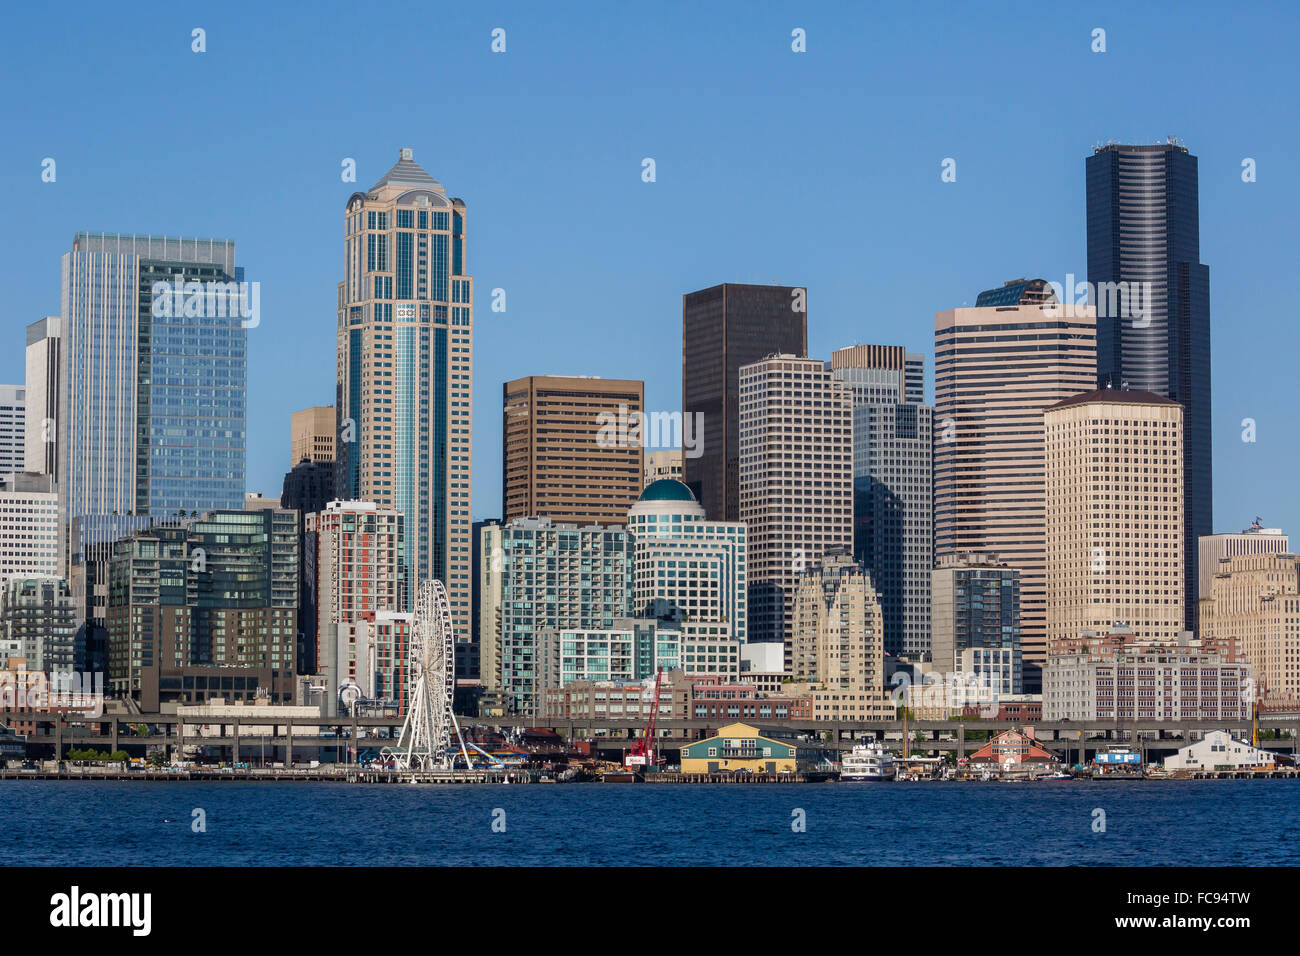 A view from Puget Sound of the downtown area of the seaport city of Seattle, King County, Washington State, USA Stock Photo